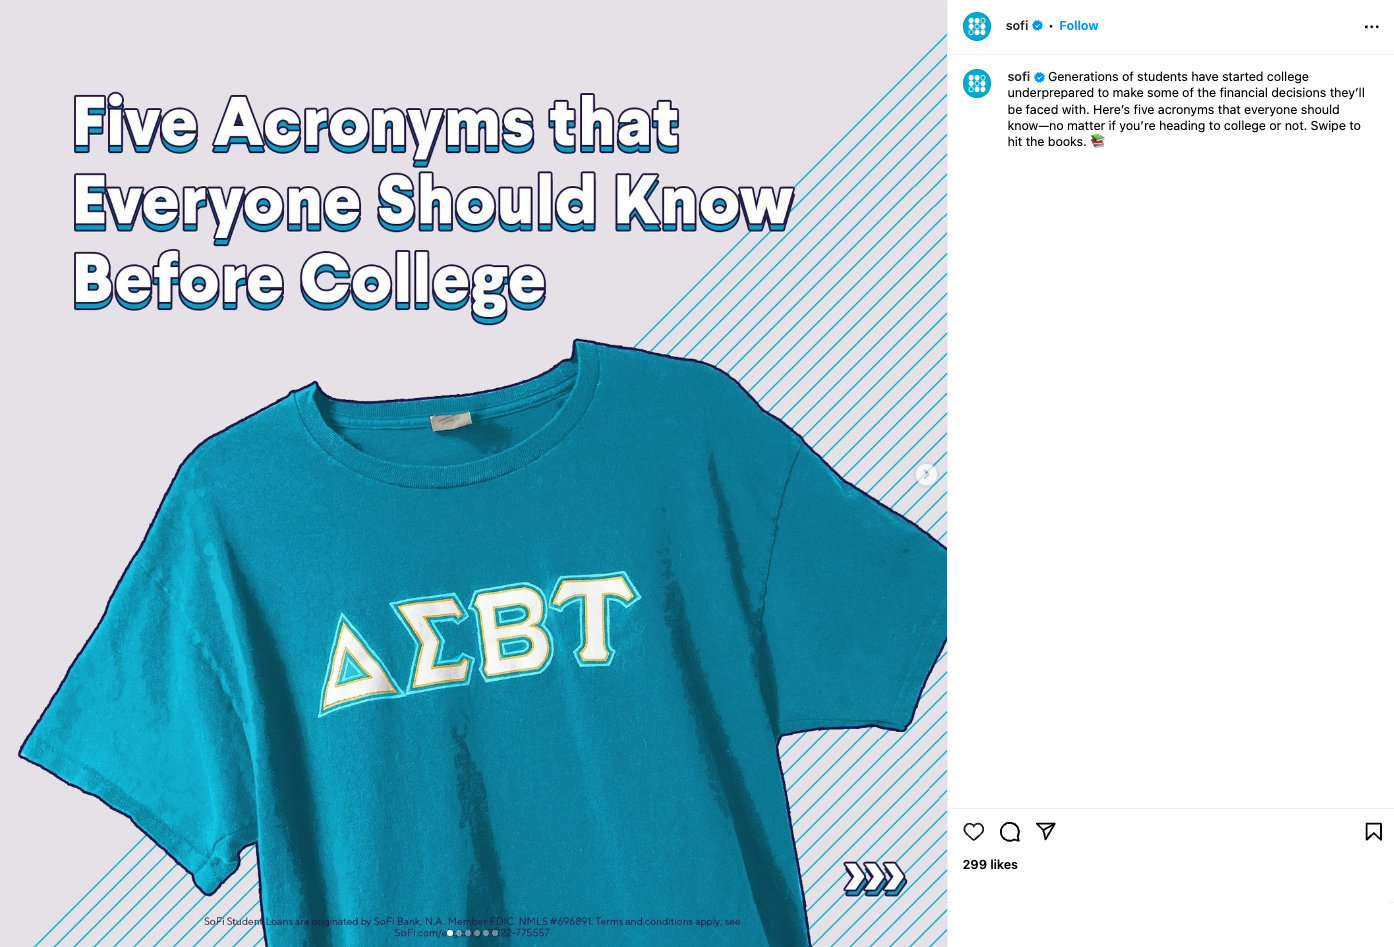 SoFi Instagram post about college acronyms 